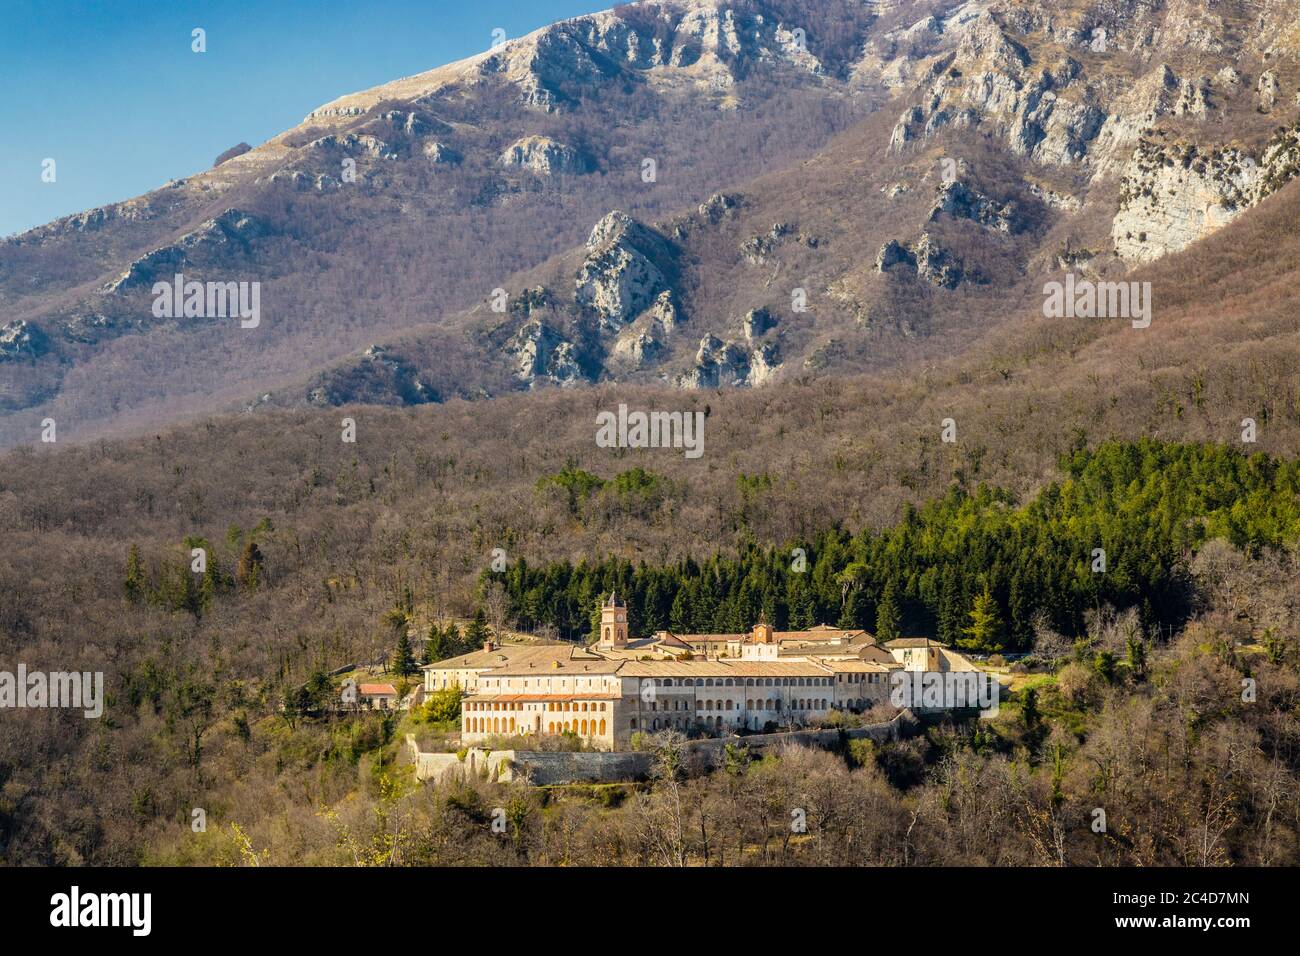 Trisulti Charterhouse is a former Carthusian e Cistercian monastery, in Collepardo, province of Frosinone, Lazio, central Italy. View of the isolated Stock Photo